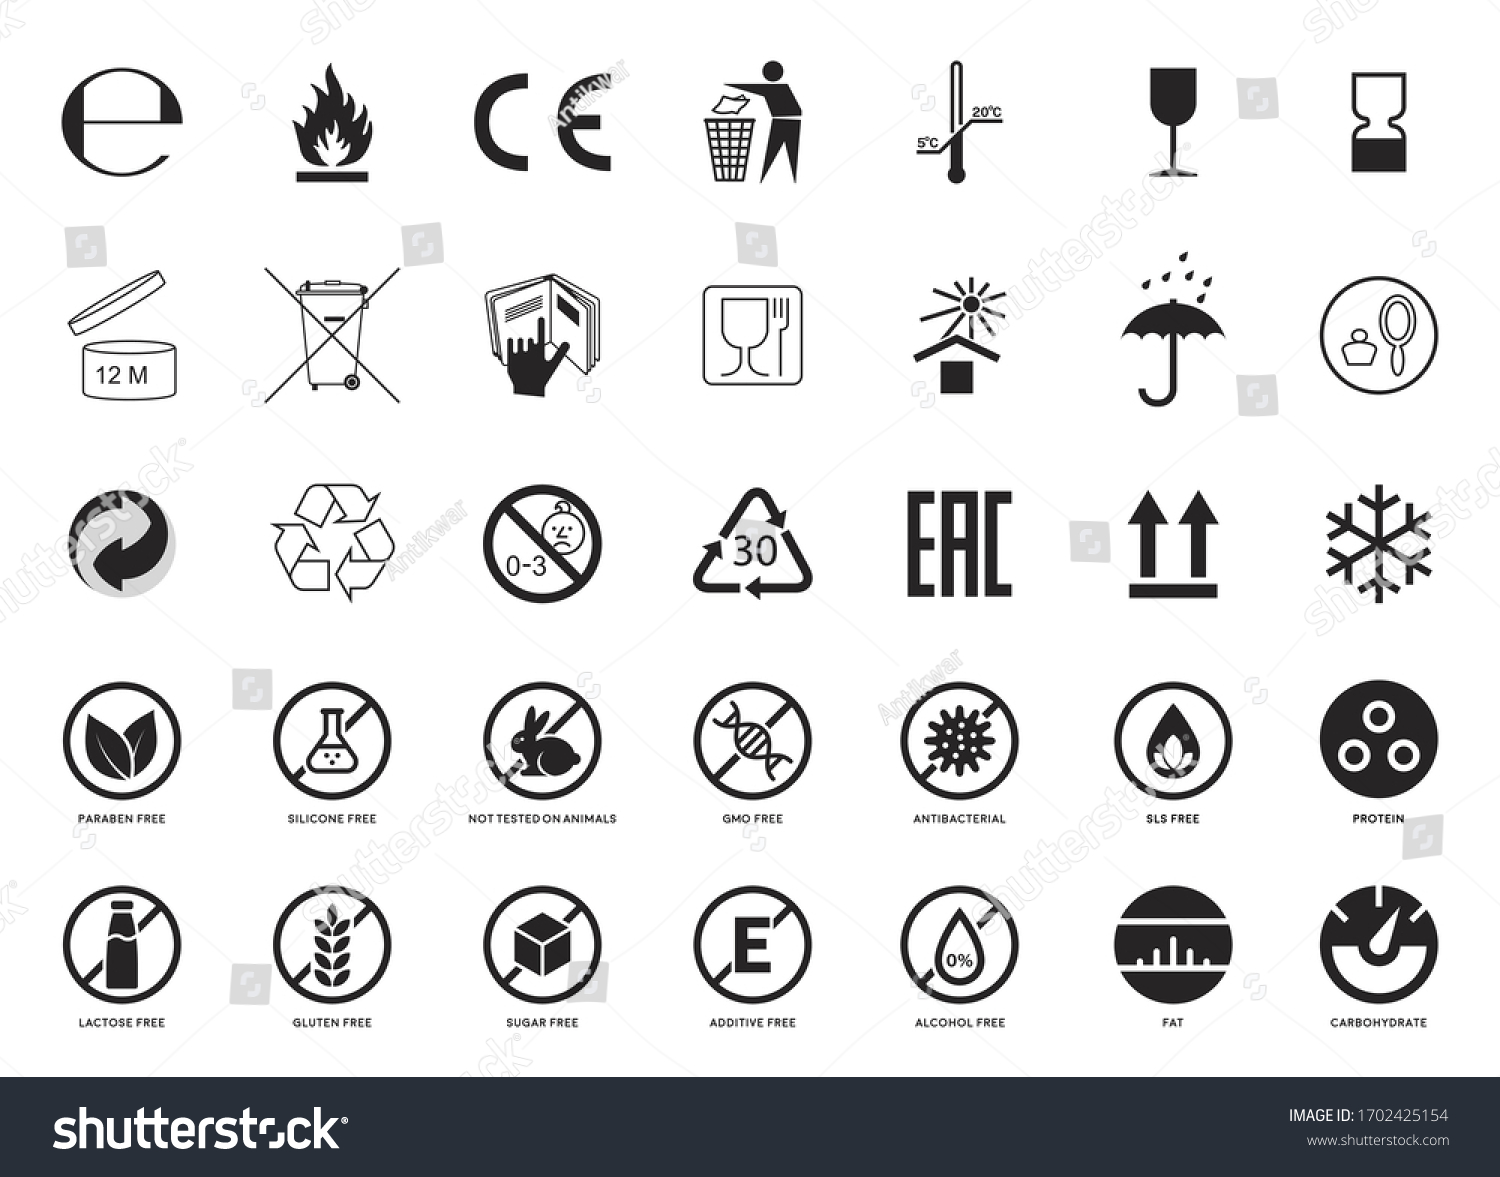 Set of Packaging Symbols. Handbook general symbols. Gluten, Lactose, GMO, Paraben, Silicone , SLS, Sugar free, Food additive, Not Tested on Animals, Antibacterial, Protein, Fat Carbohydrate icons. #1702425154